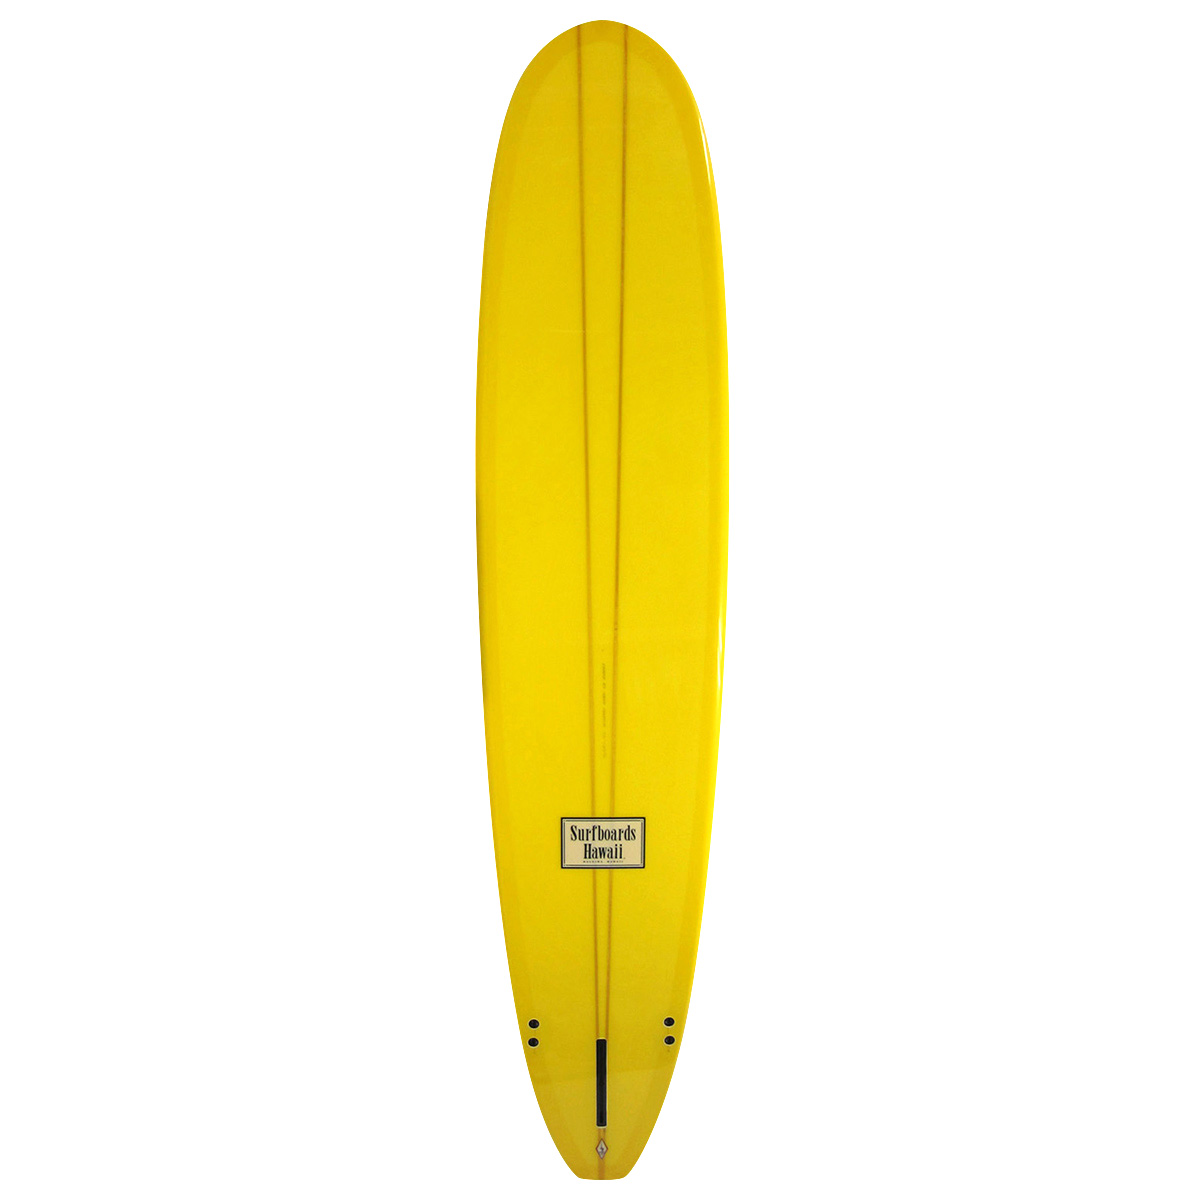 Surfboards Hawaii / 9'6 Nose Rider Shaped by Greg Griffin